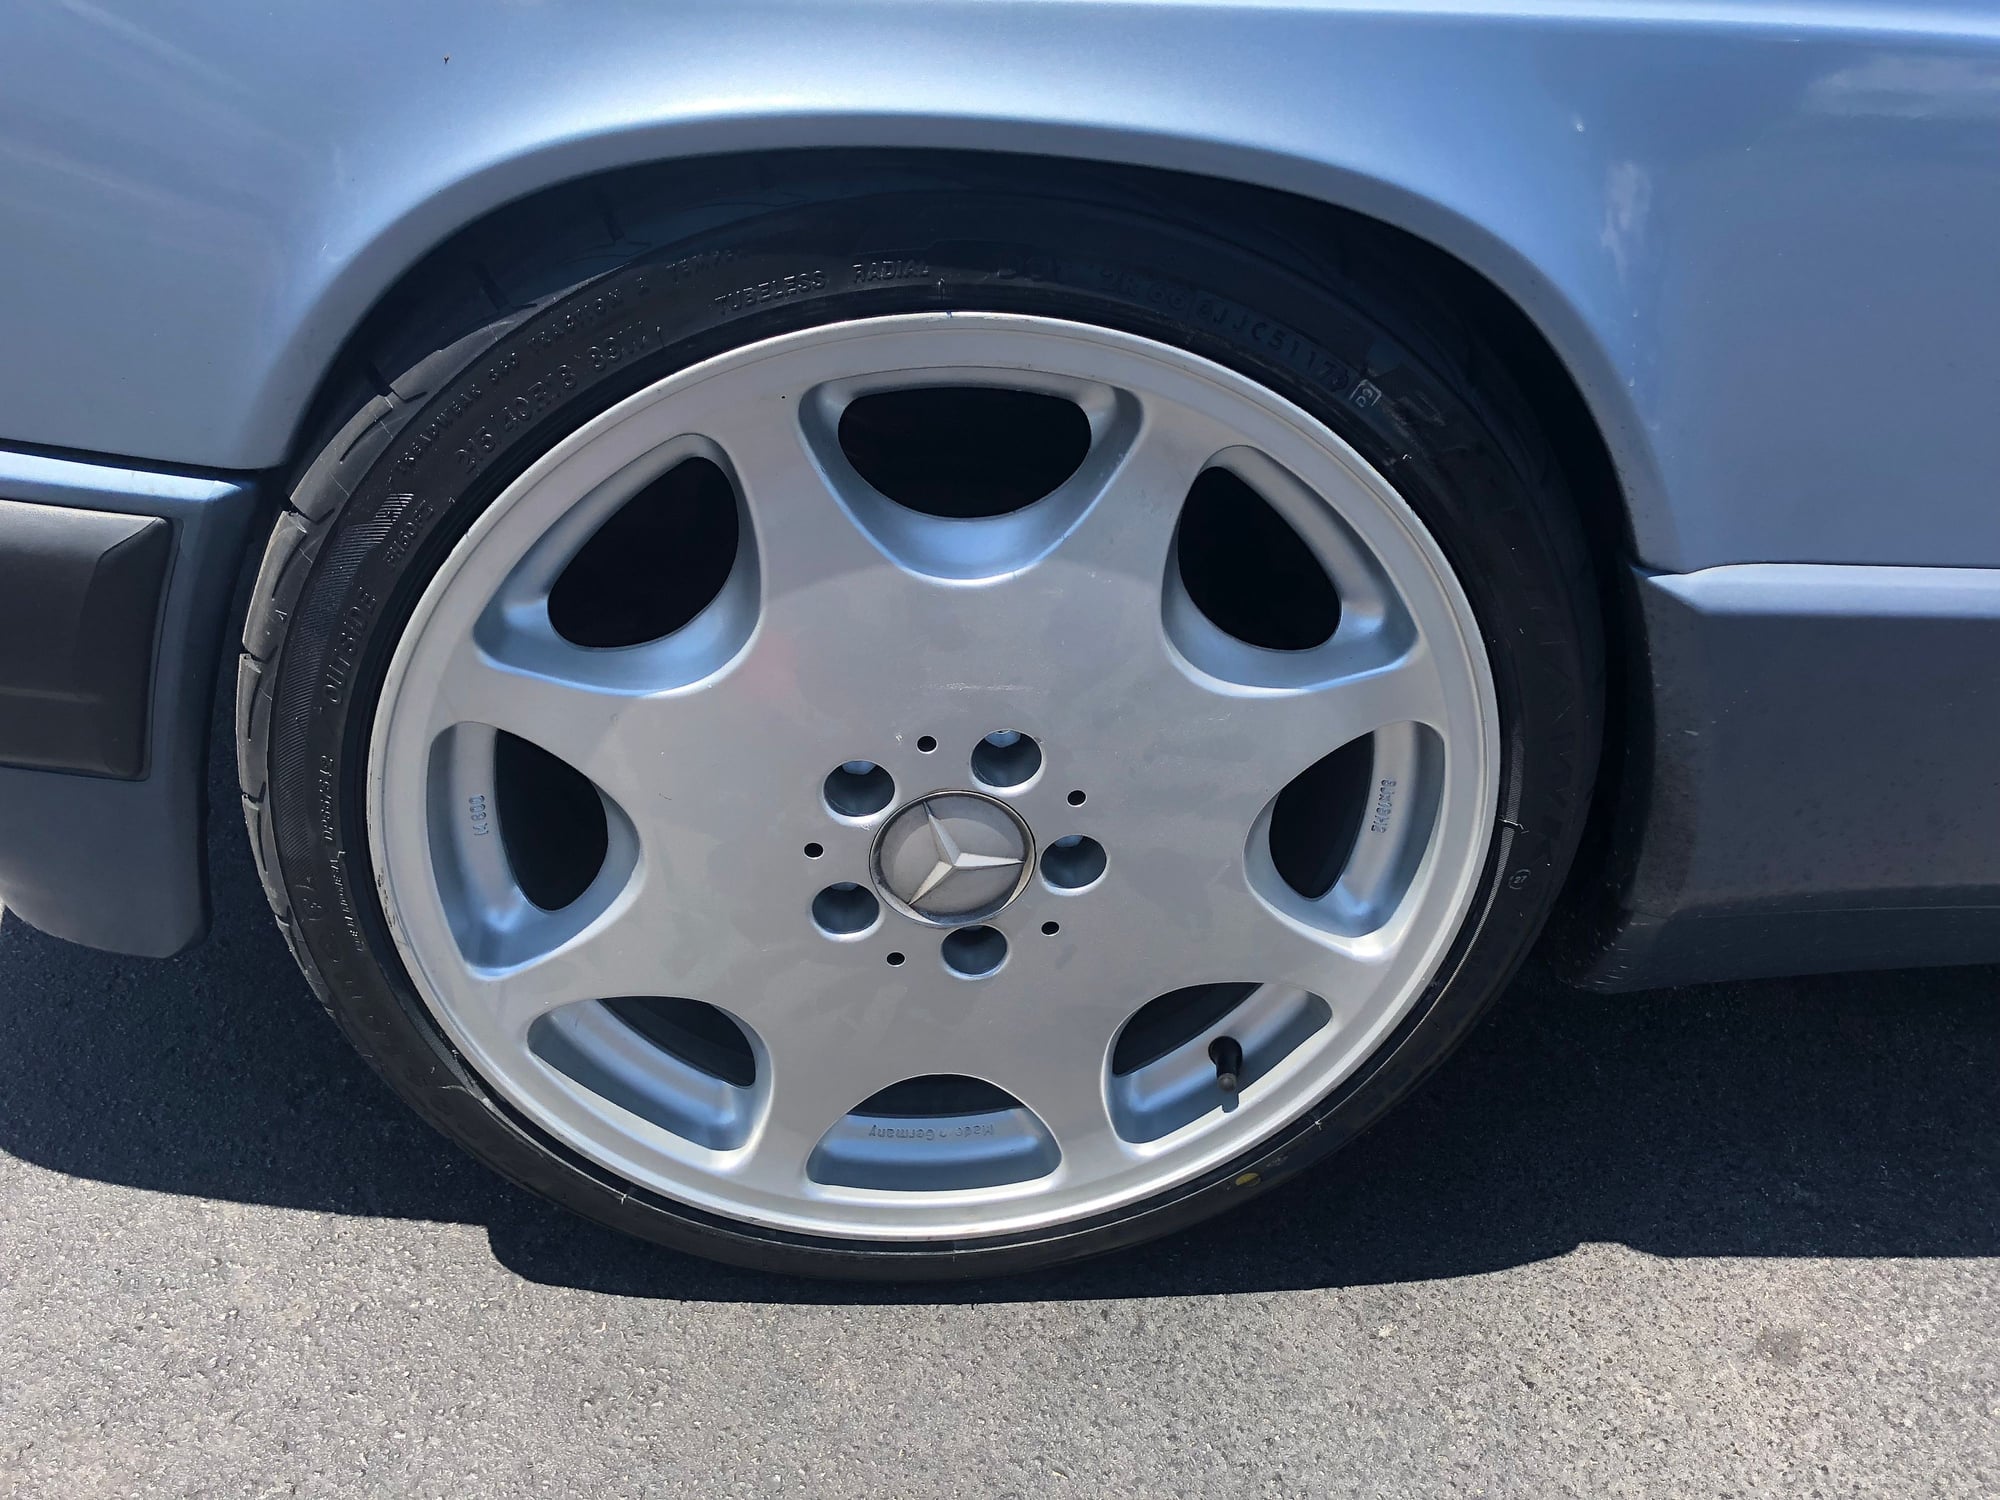 Wheels and Tires/Axles - Rare 8 hole 18x8 Rial ARC M800 for sale with new tires $1500 + Shipping - Used - Miami, FL 33156, United States